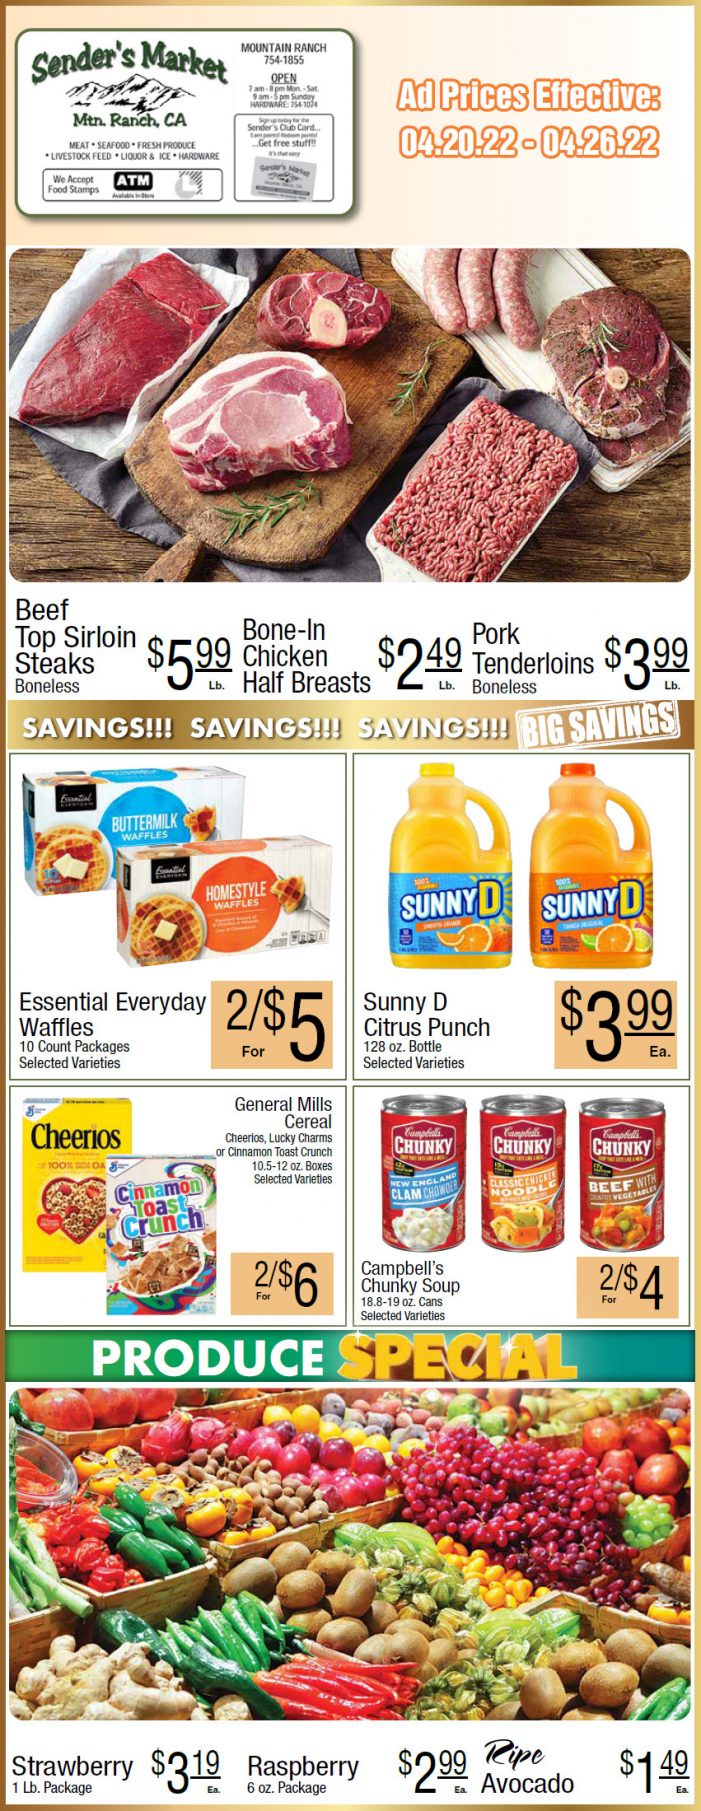 Sender’s Market Weekly Ad & Grocery Specials April 20th ~ April 26th! Shop Local & Save!